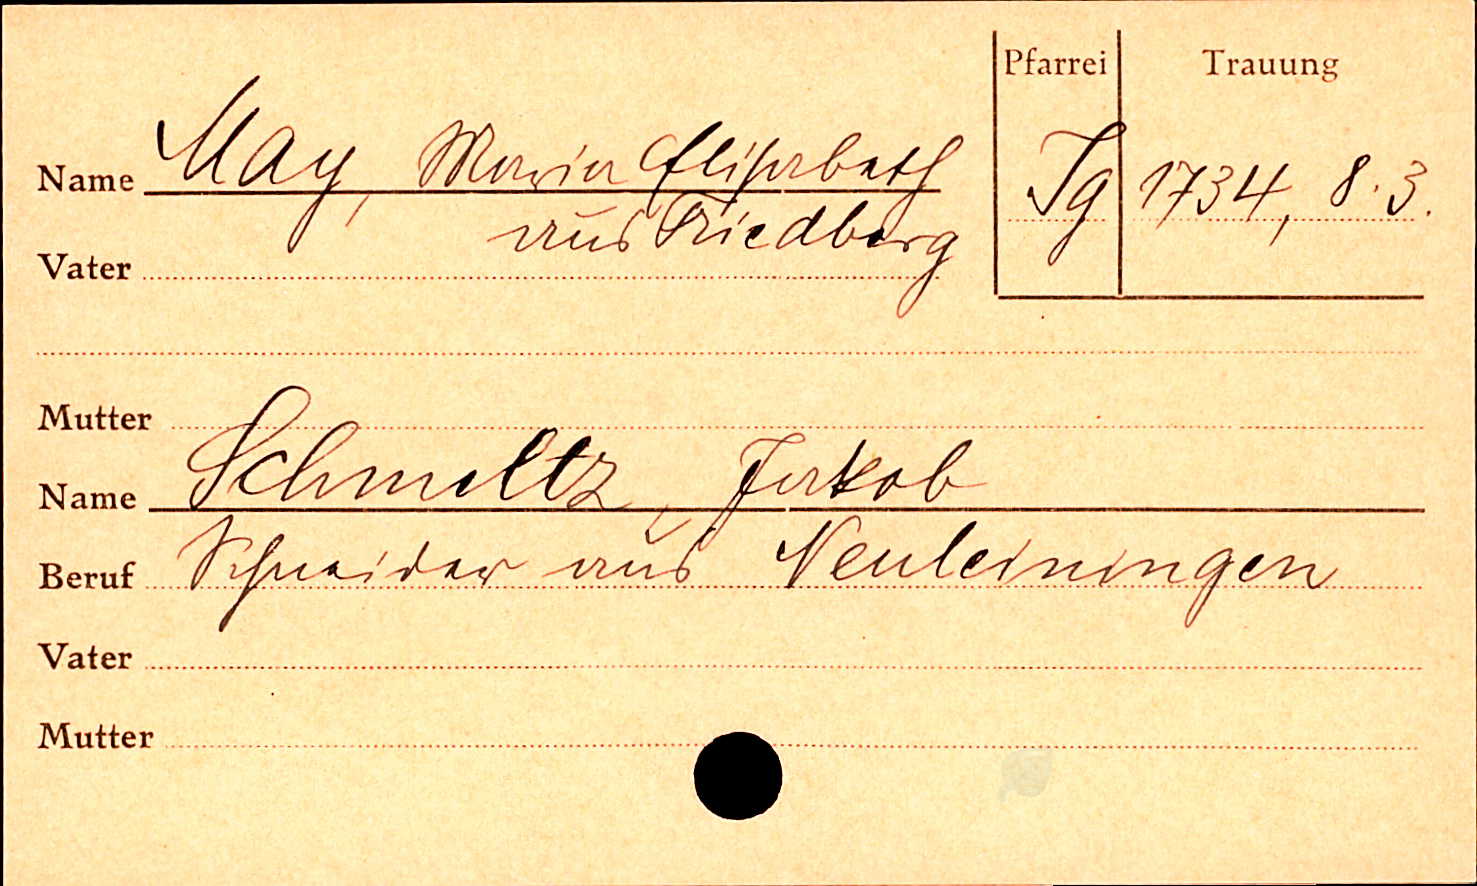 Marriage record of Jakob Schmeltz and Maria Elisabeth May